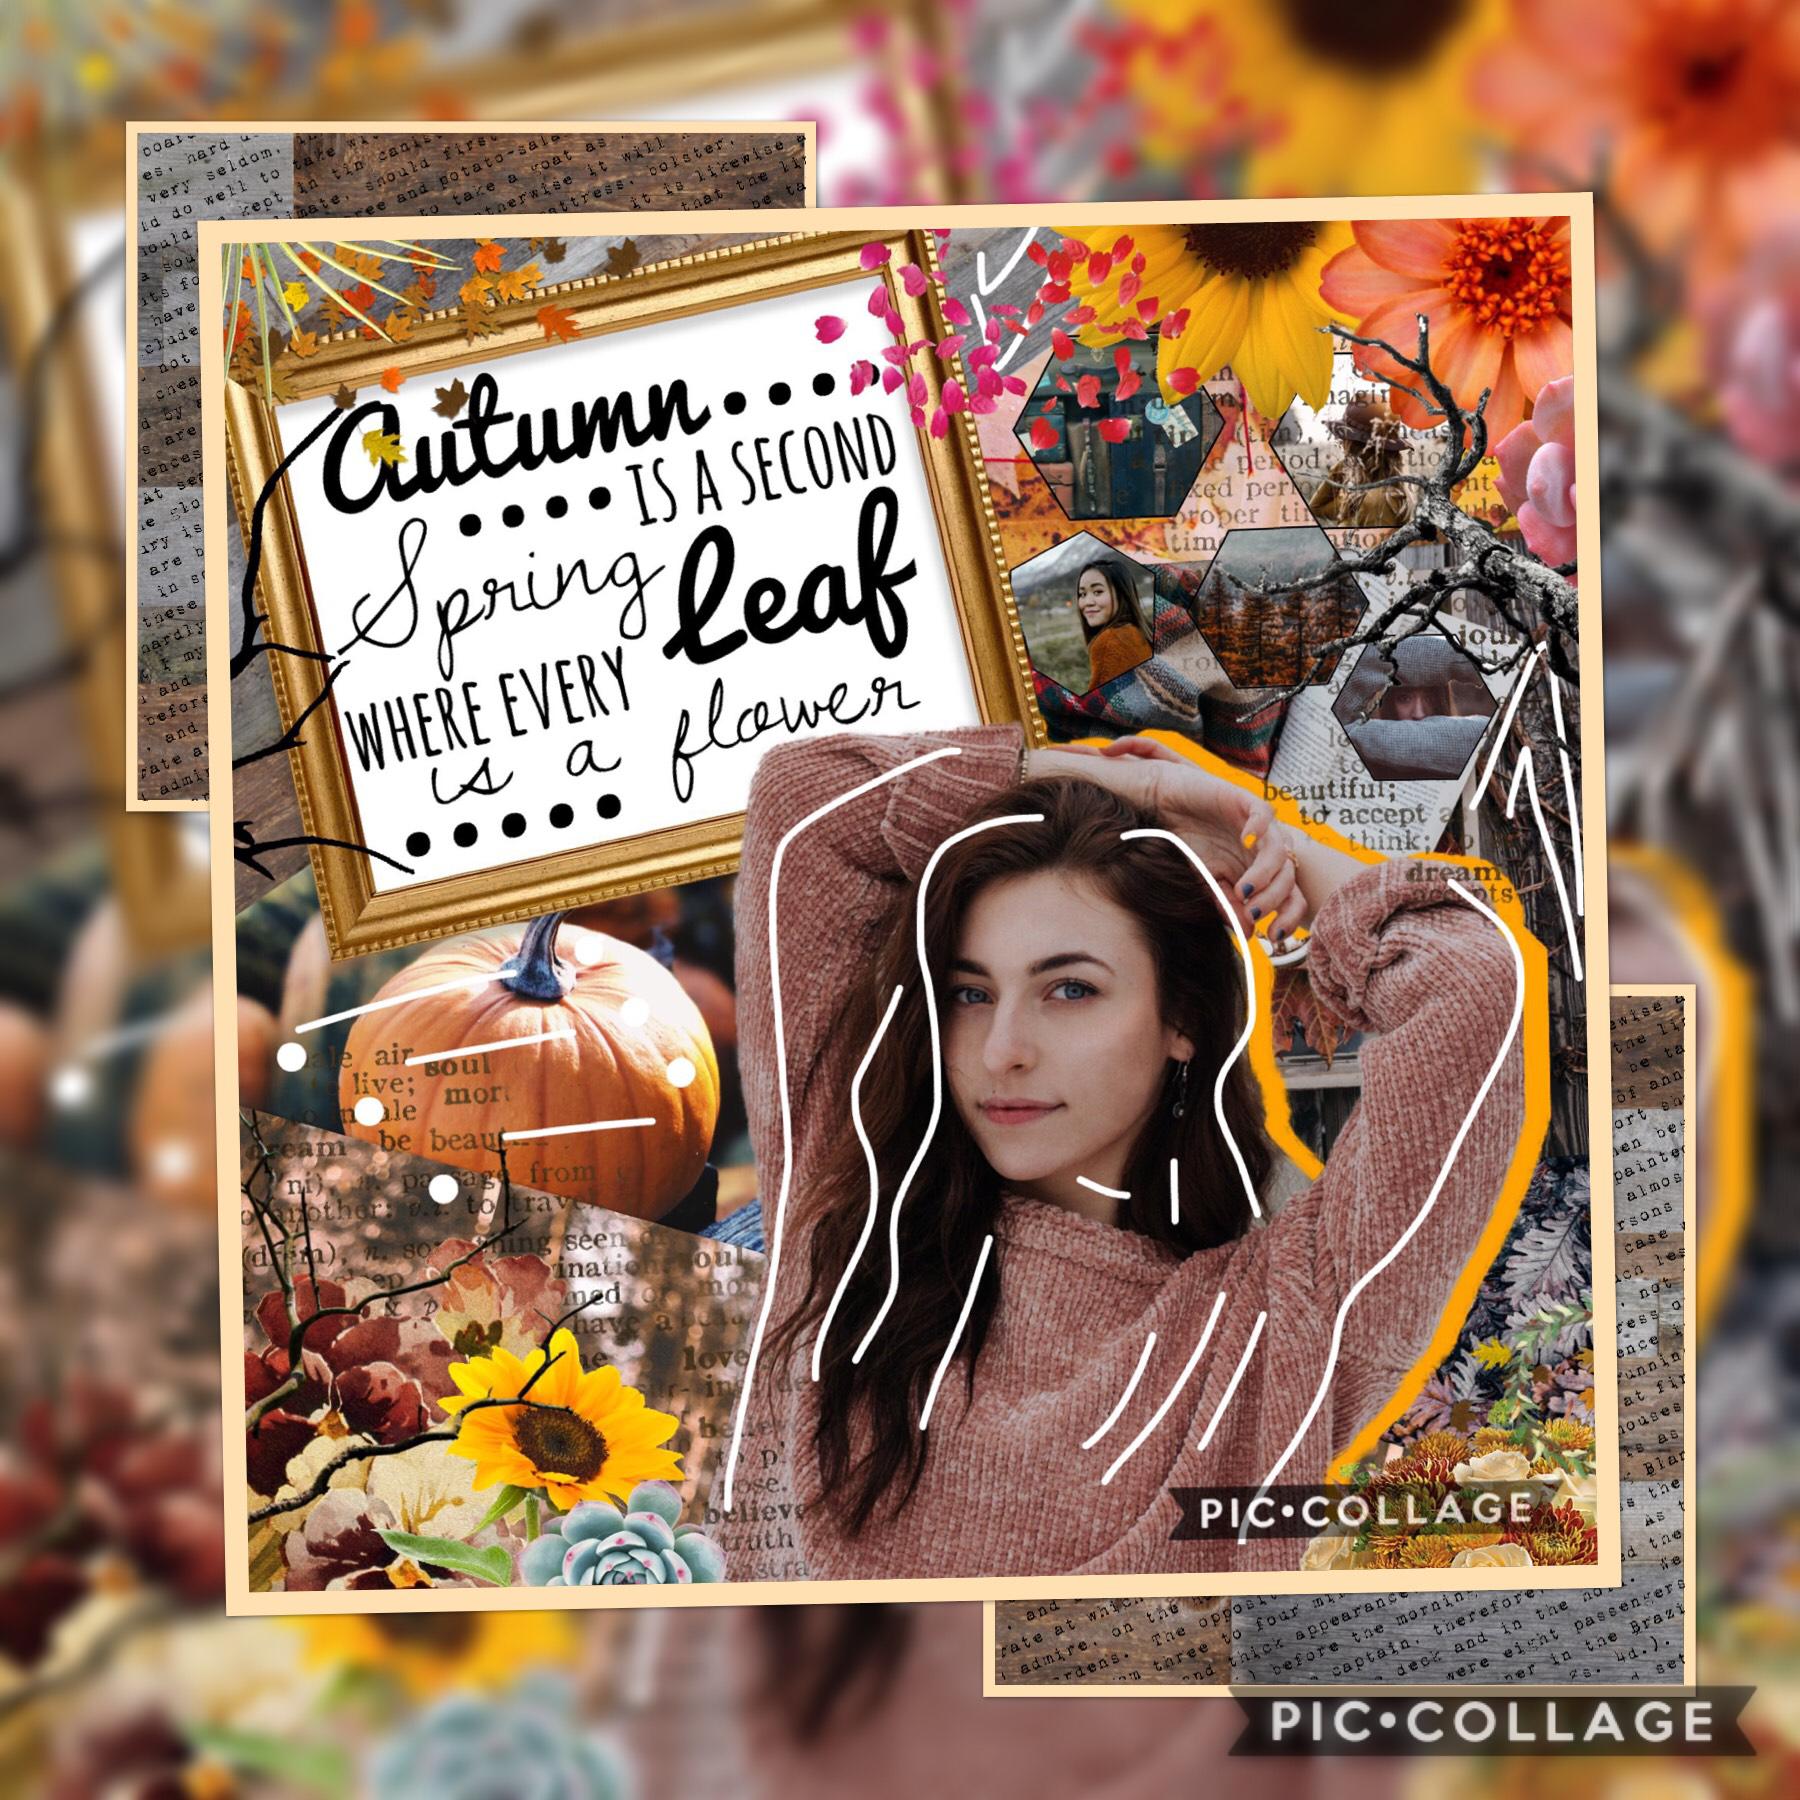 Tap!
Fall collage! My first one😁 
QOTD: what’s your fav thing about fall?
Aotd: the weather and how pretty everything is!😆🍂🍁🍂